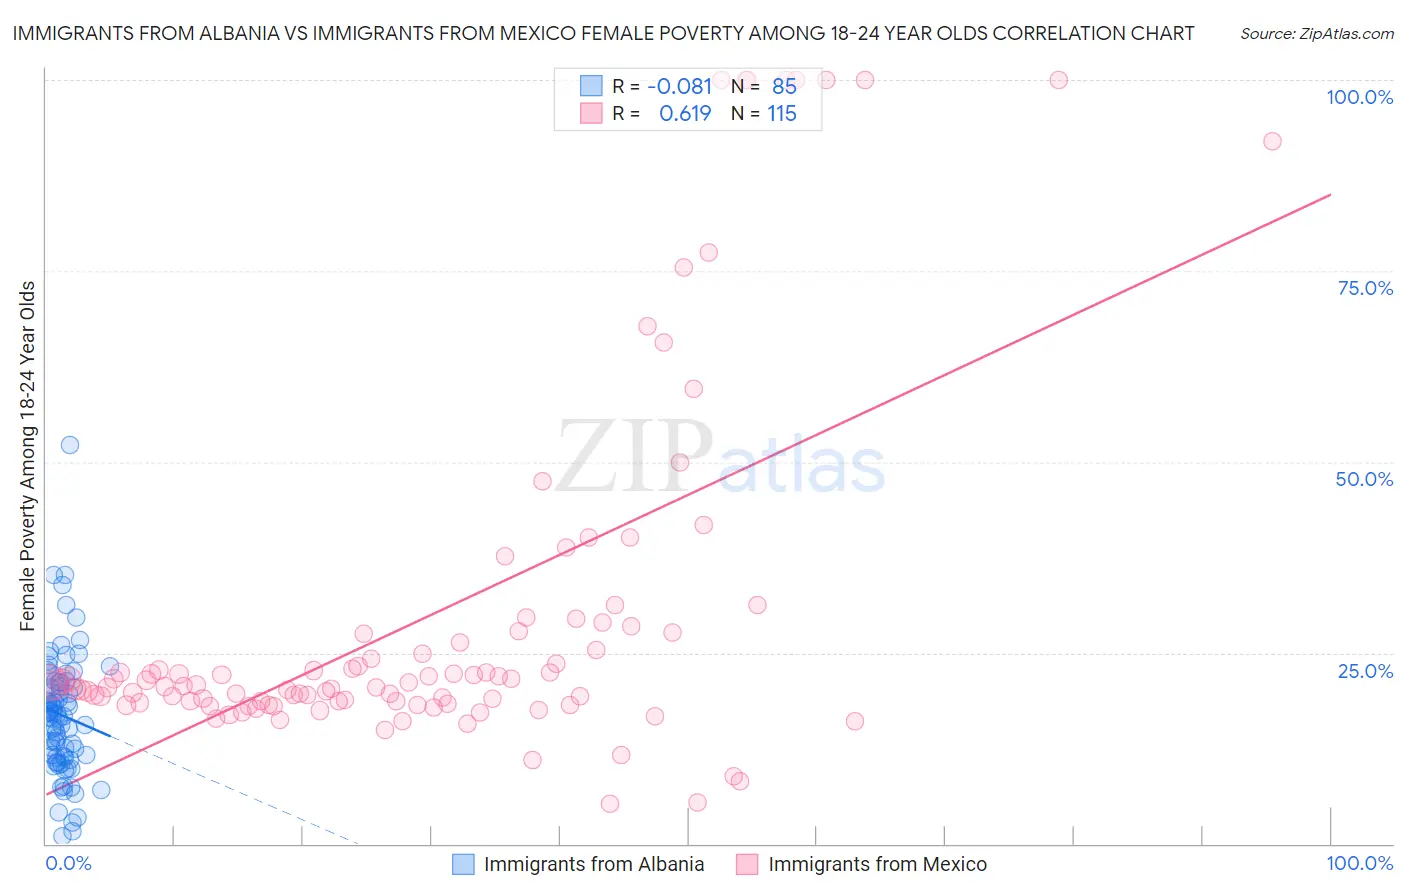 Immigrants from Albania vs Immigrants from Mexico Female Poverty Among 18-24 Year Olds